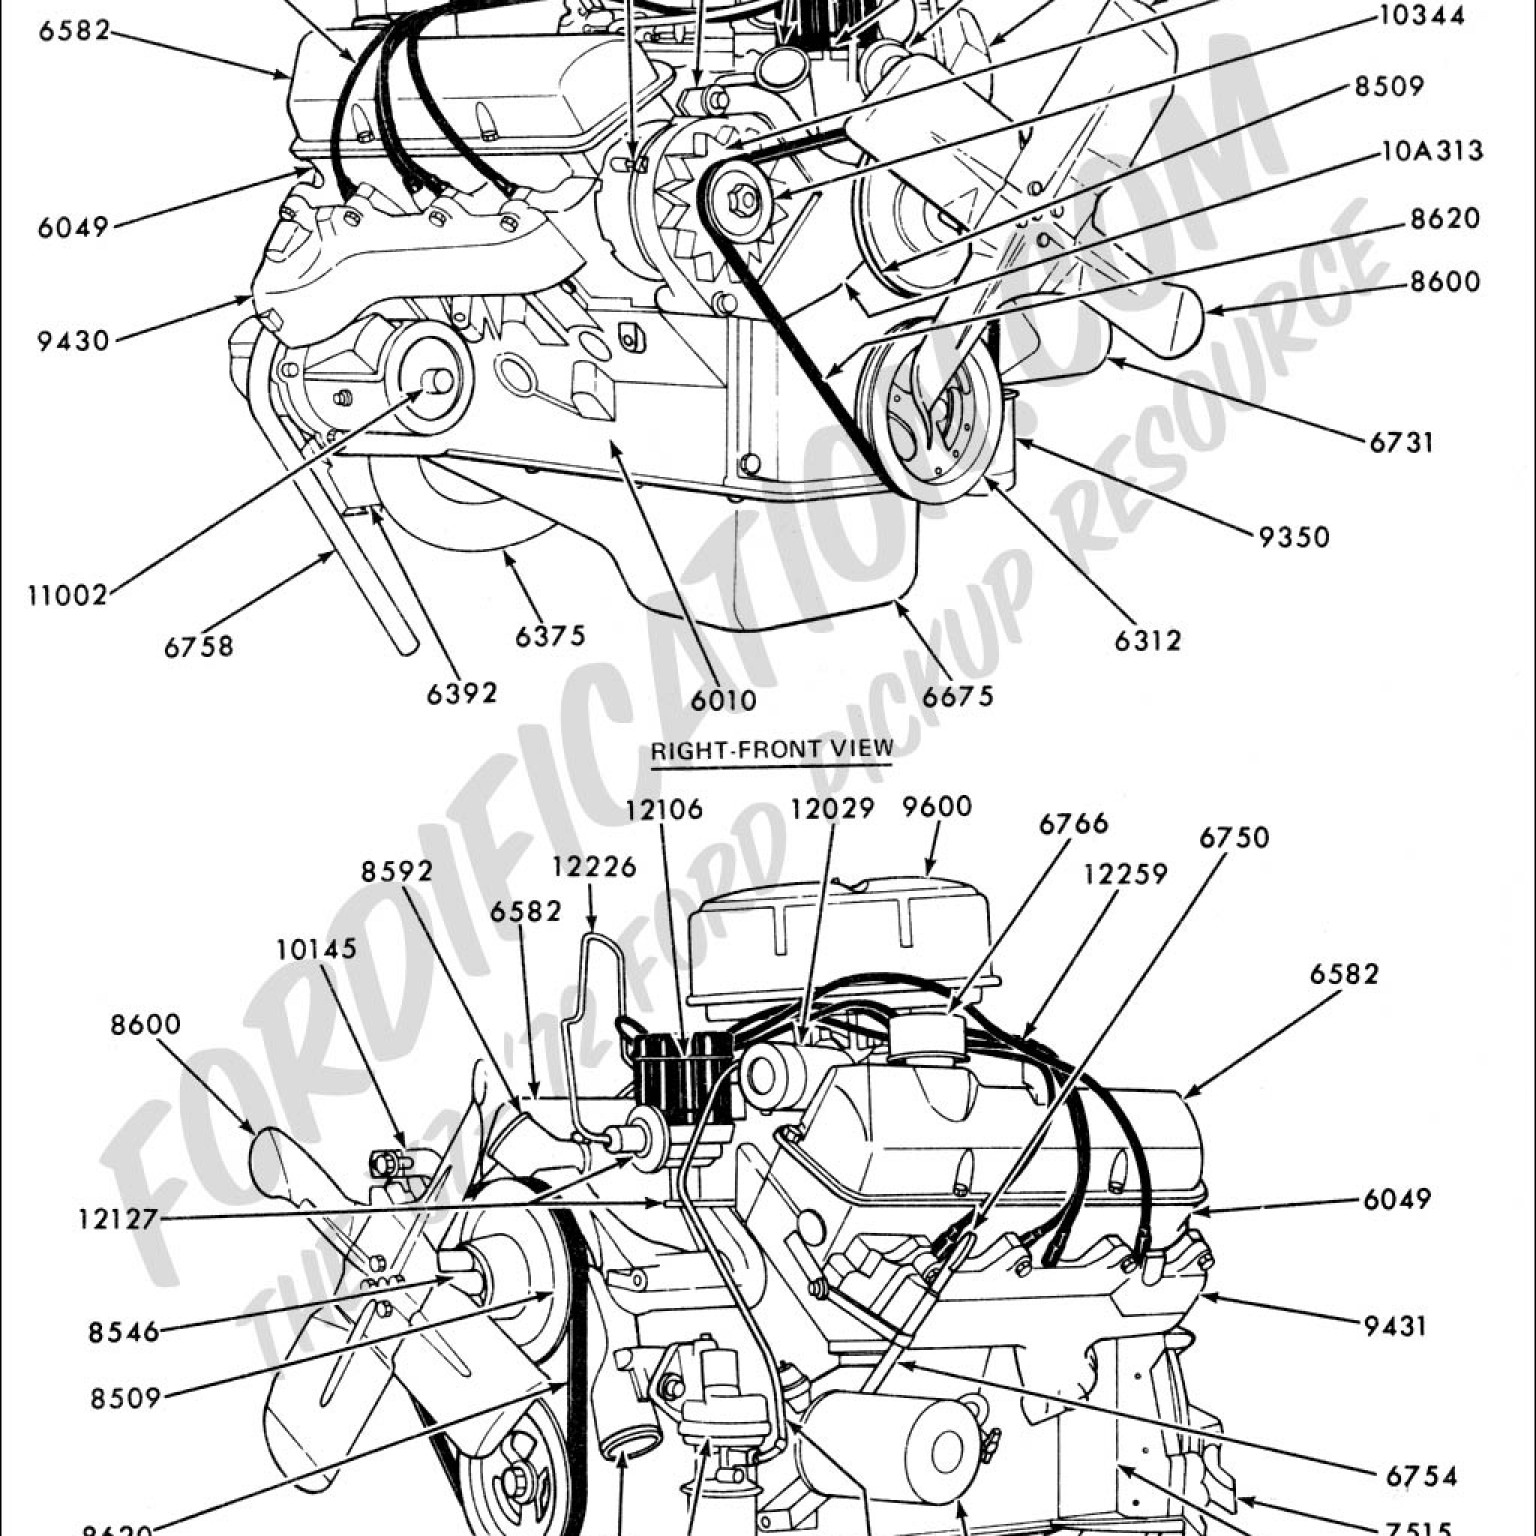 Ford 360 Engine Diagram - Seniorsclub.it Schematic-Smell | Wiring and